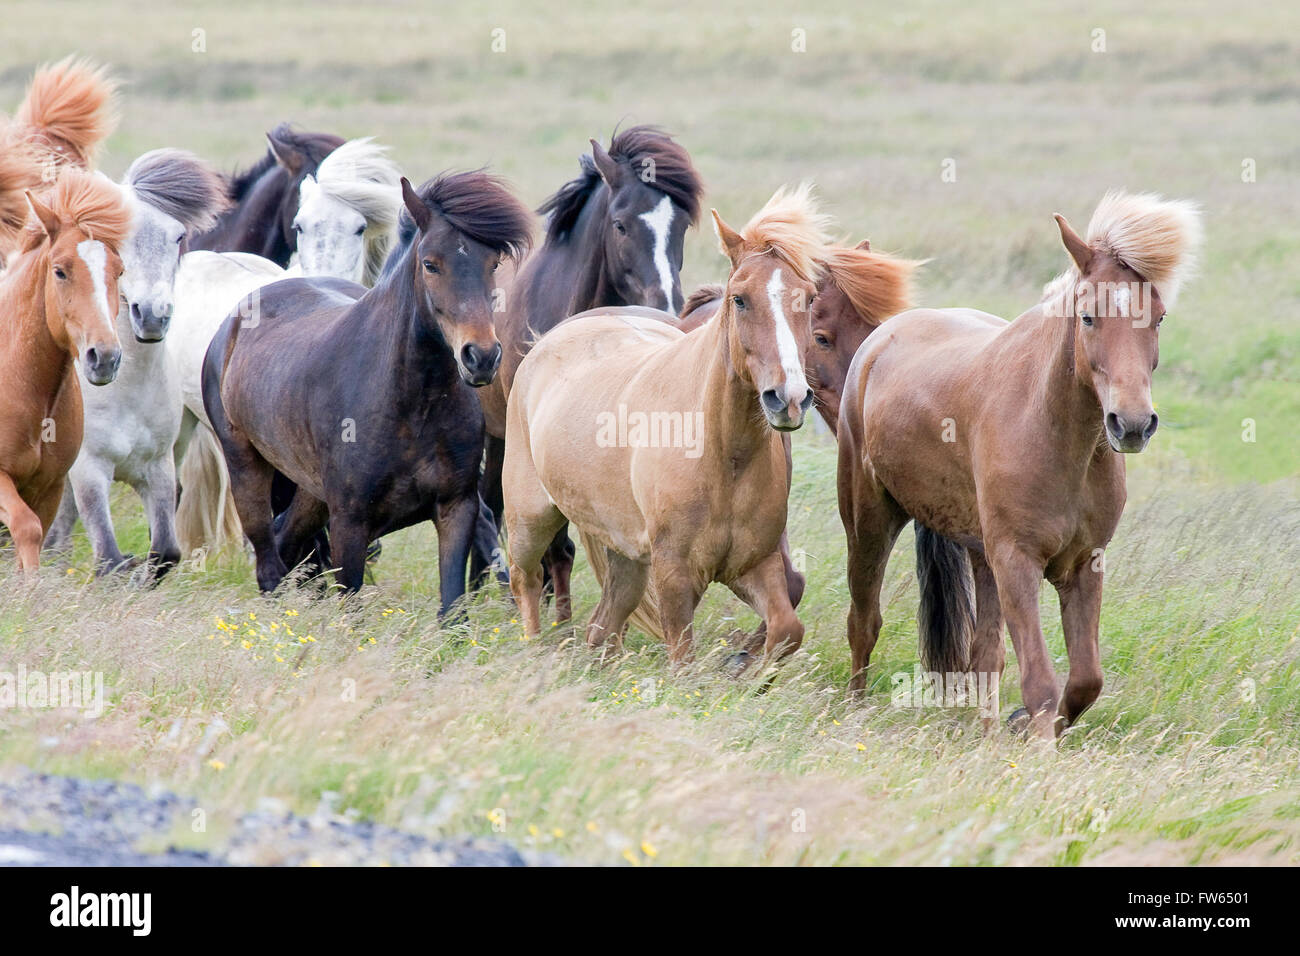 Iceland horse running in grass with flowing manes, Iceland Stock Photo